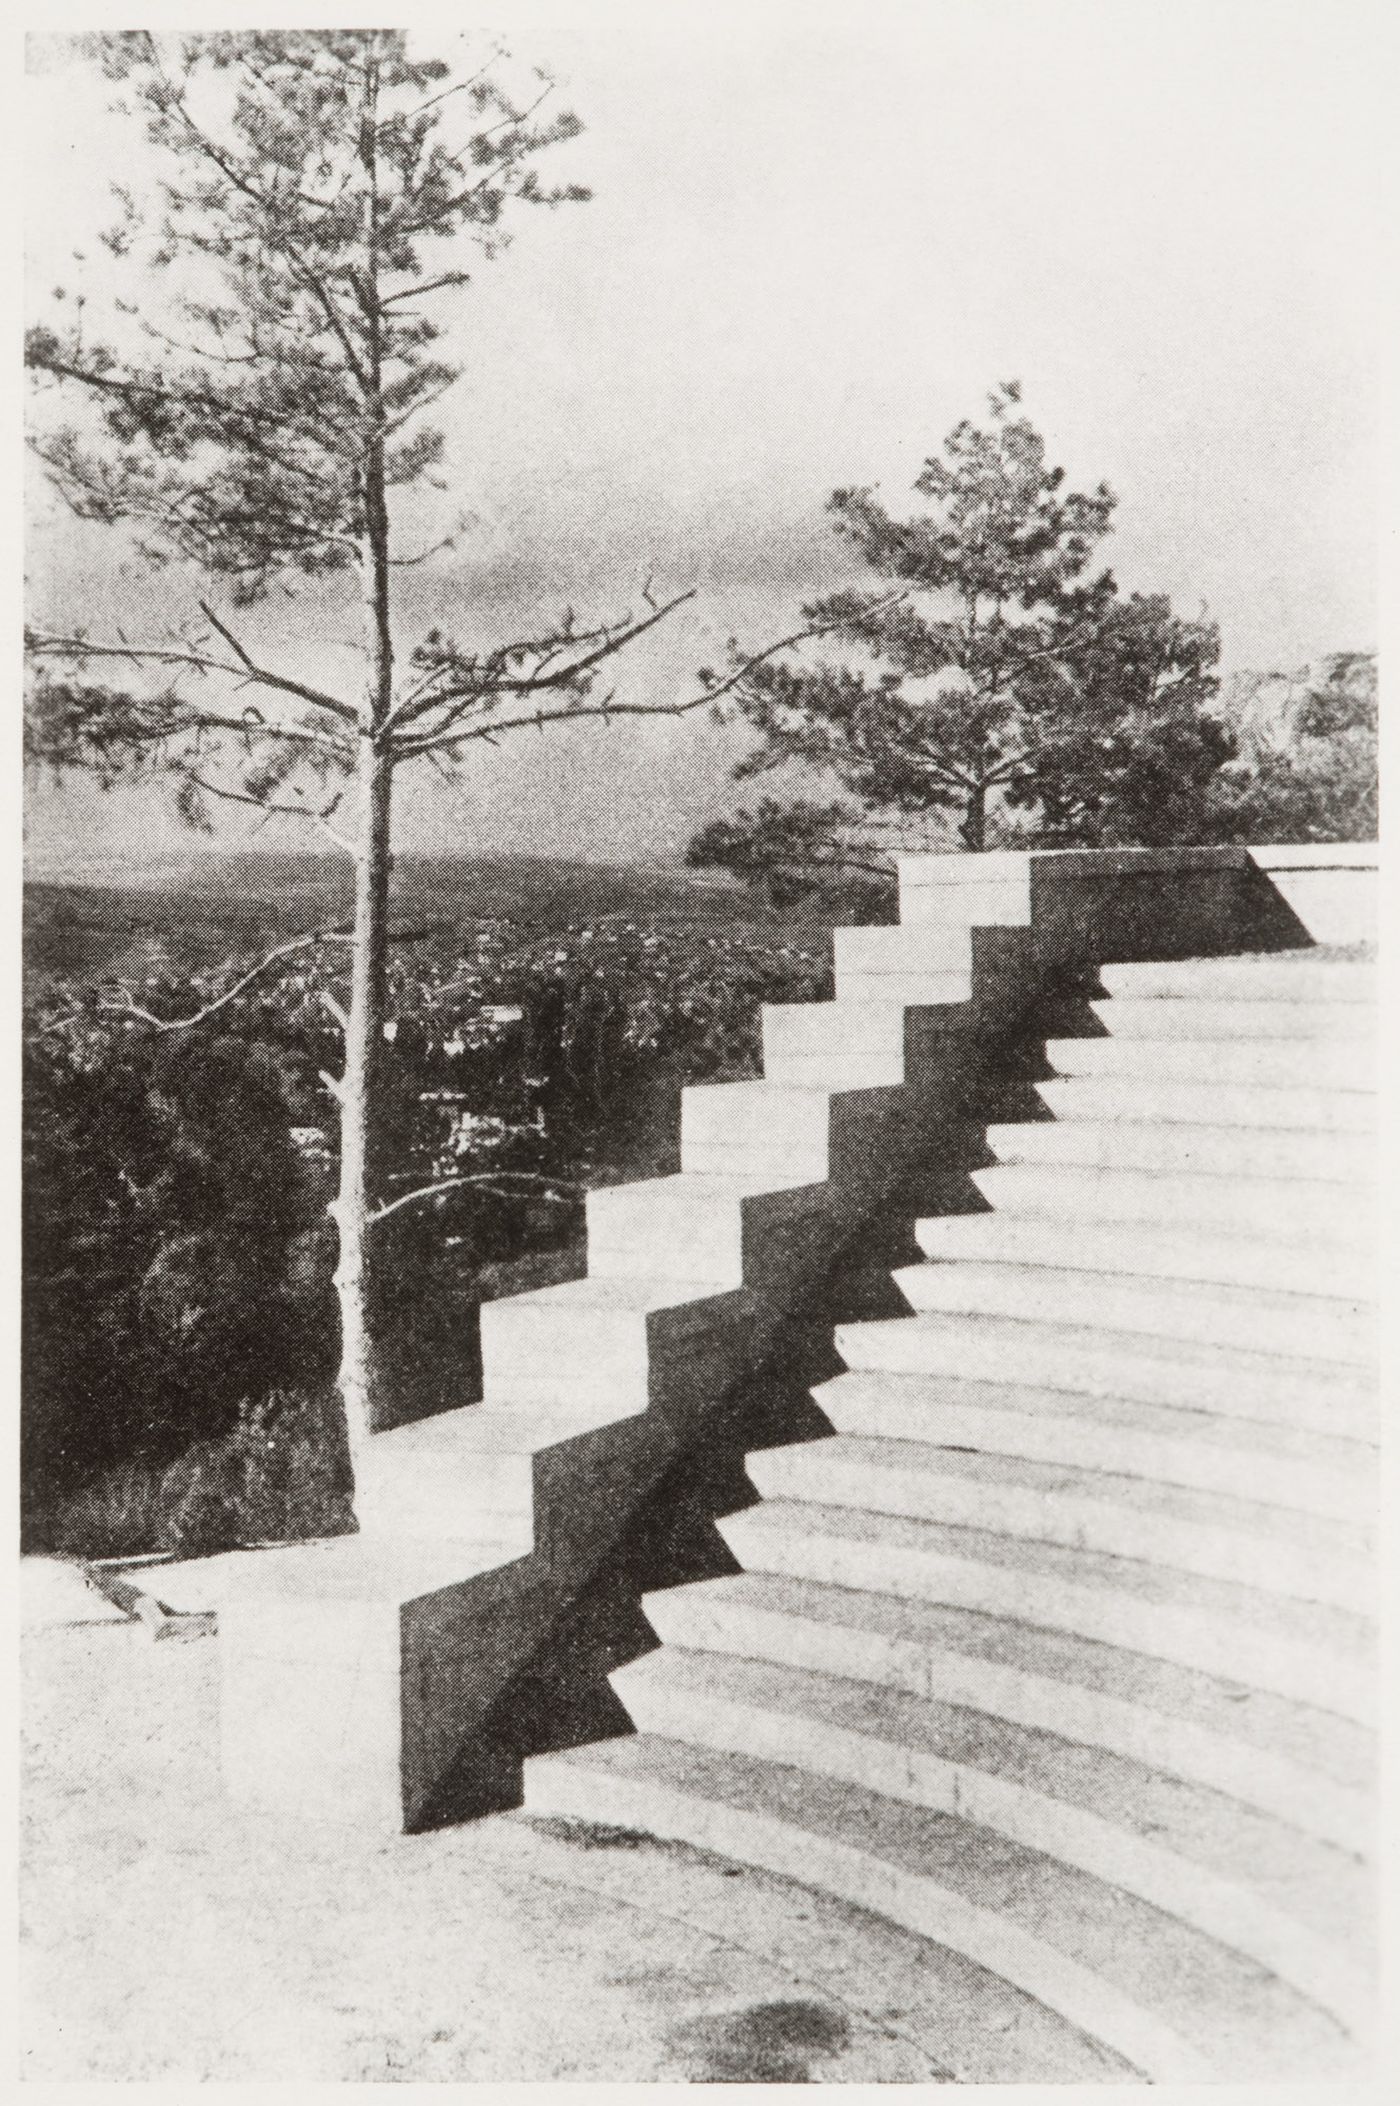 Partial exterior view of the stairs to the Ordzhonikidze Sanatorium for the People's Commissariat for Heavy Industry (Narkomtyazhprom), Kislovodsk, Soviet Union (now in Russia)